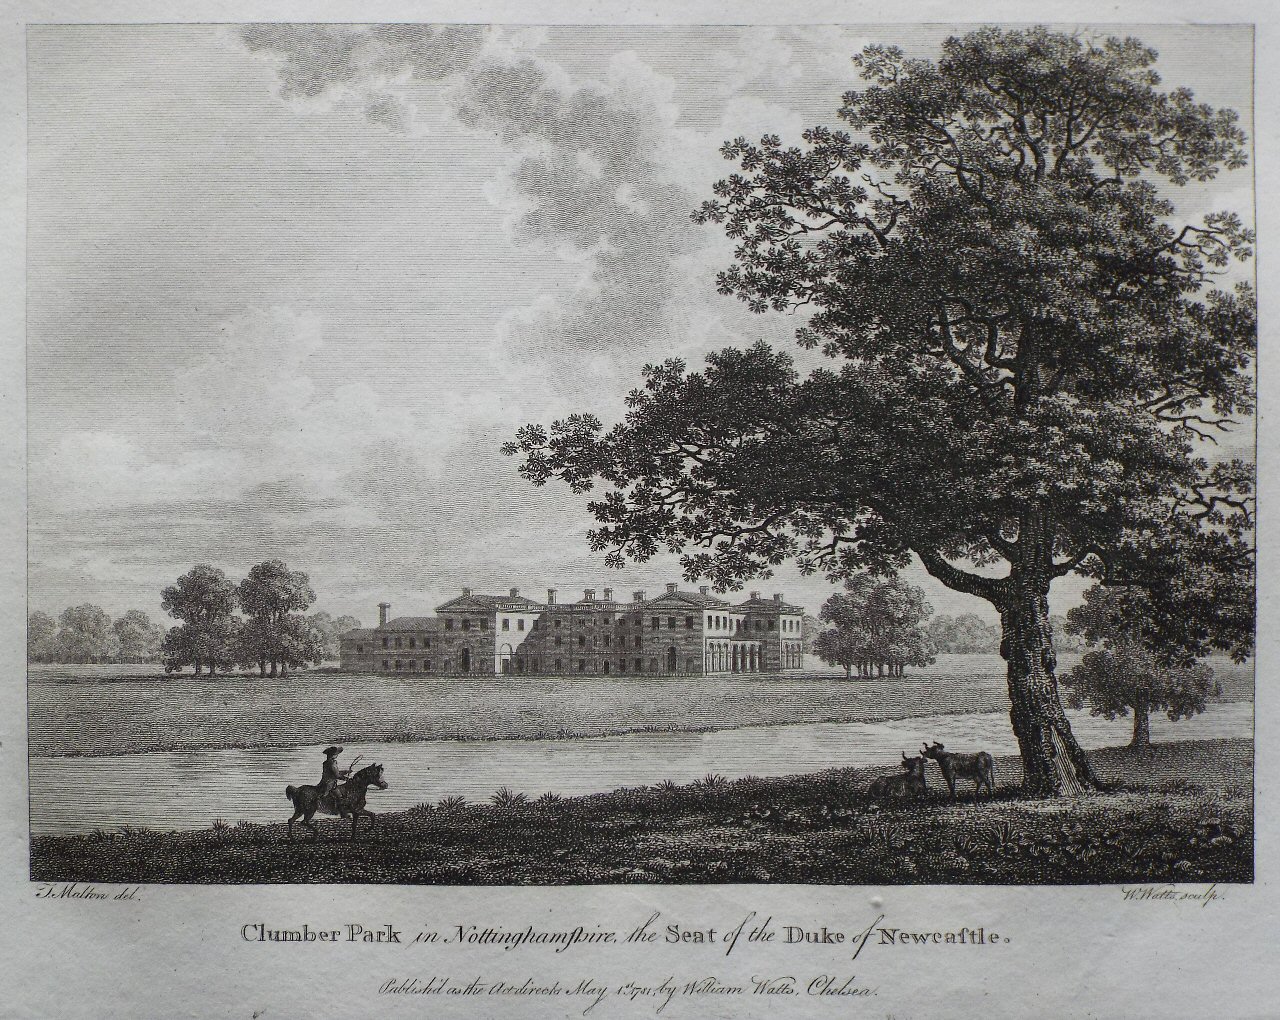 Print - Clumber Park in Nottinghamshire, the Seat of the Duke of Newcastle. - Watts